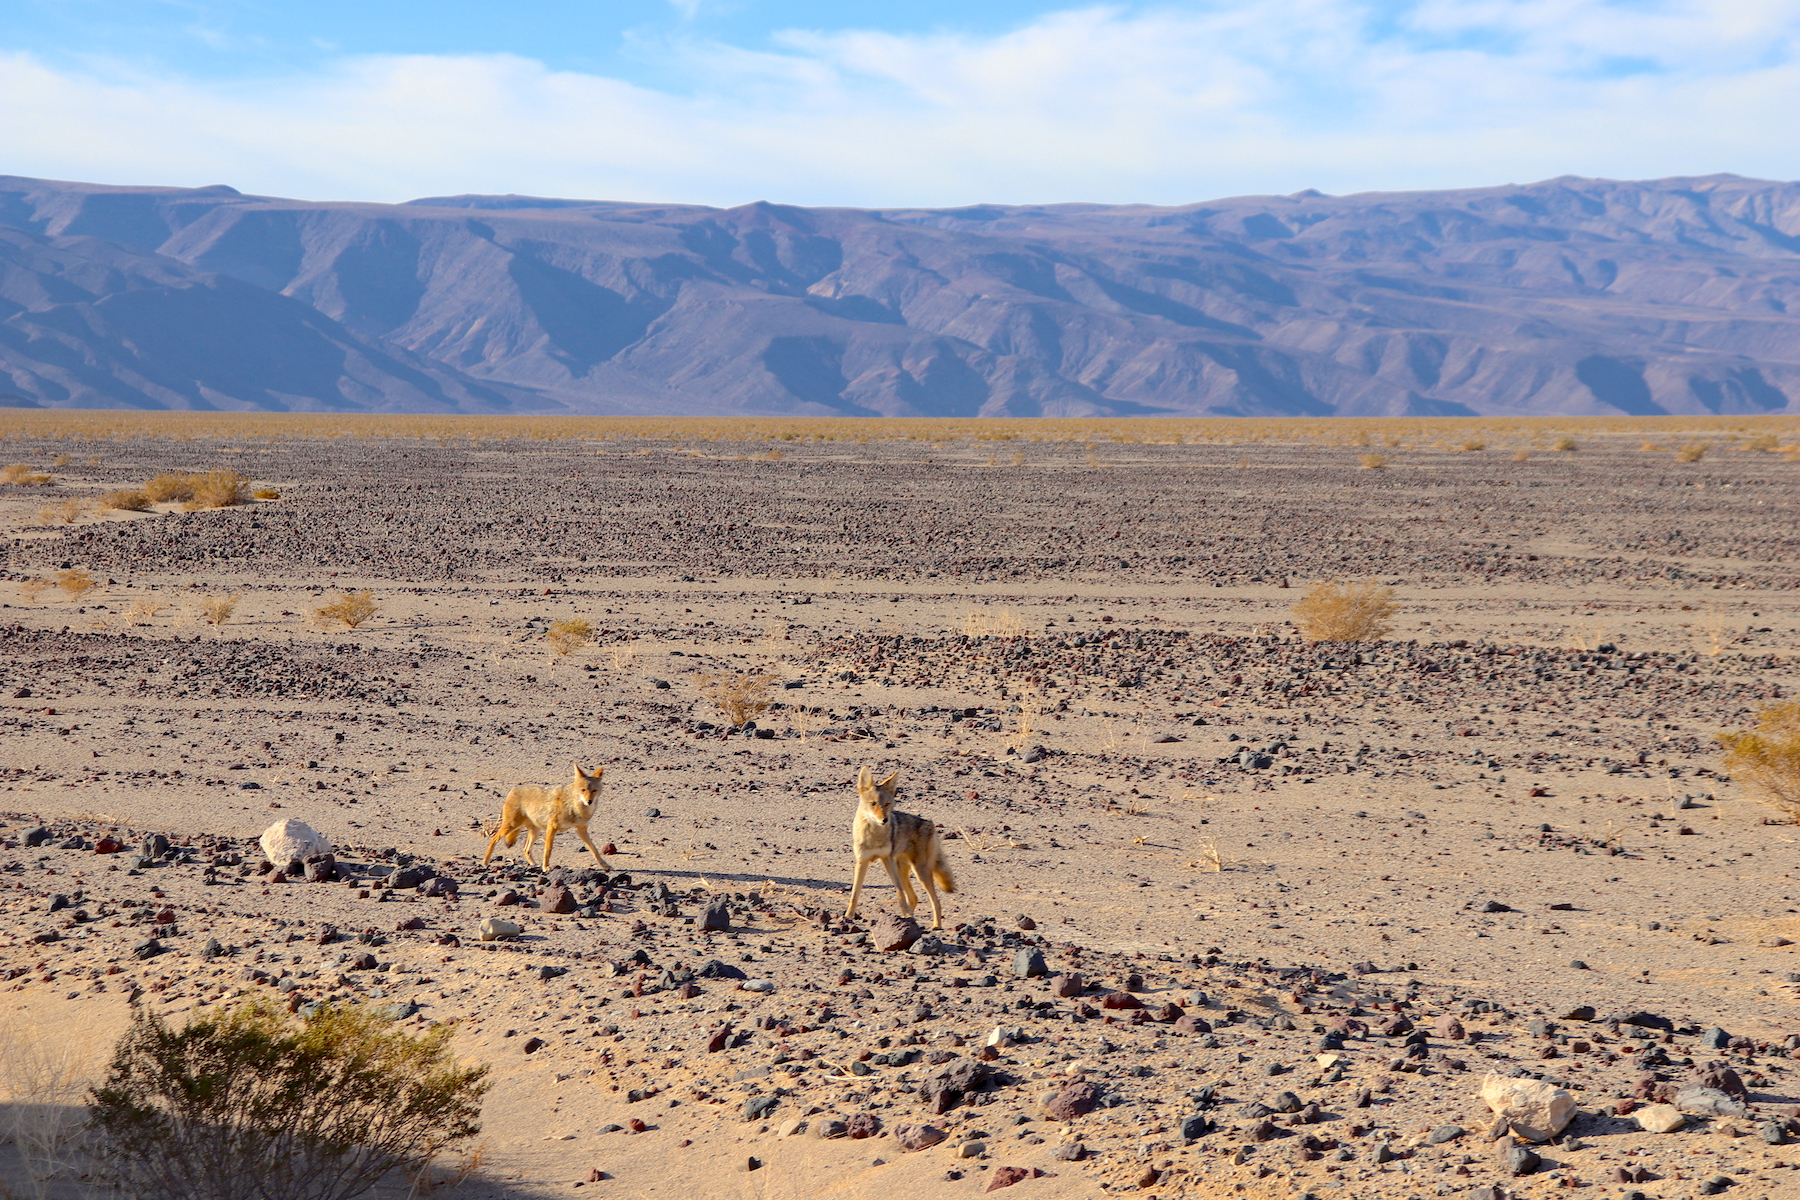 Residents of Death Valley, the coyotes